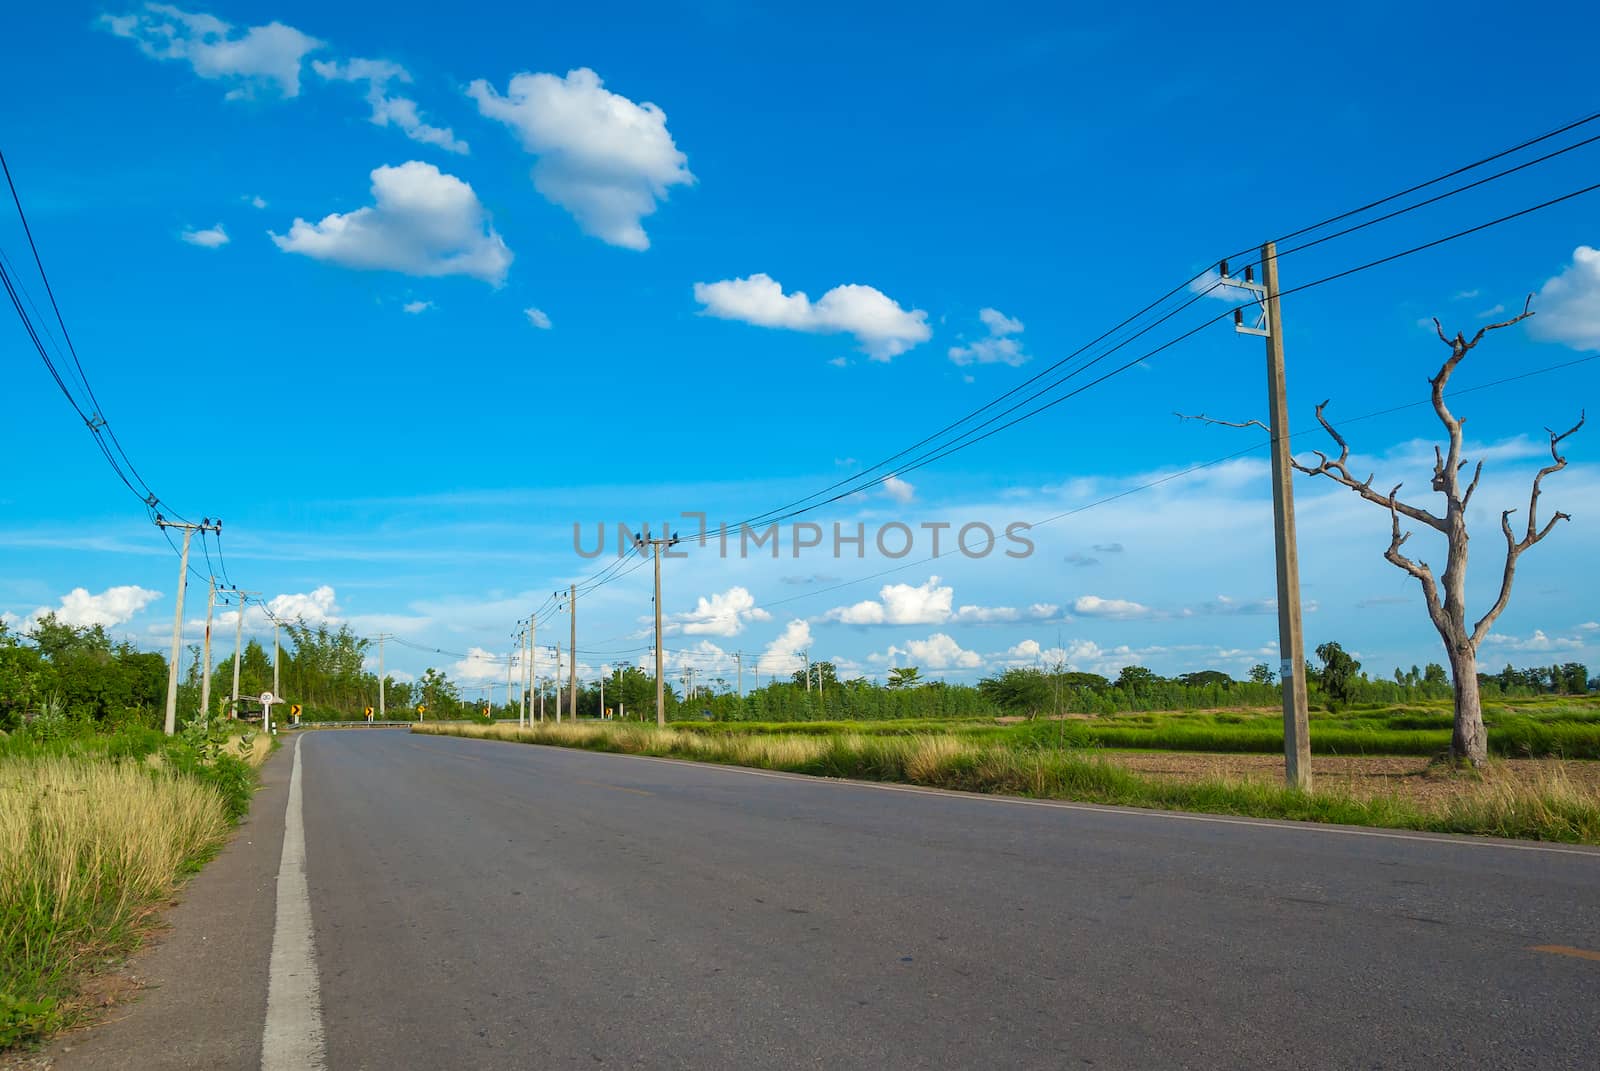 asphalt road through the green field and clouds on blue sky.